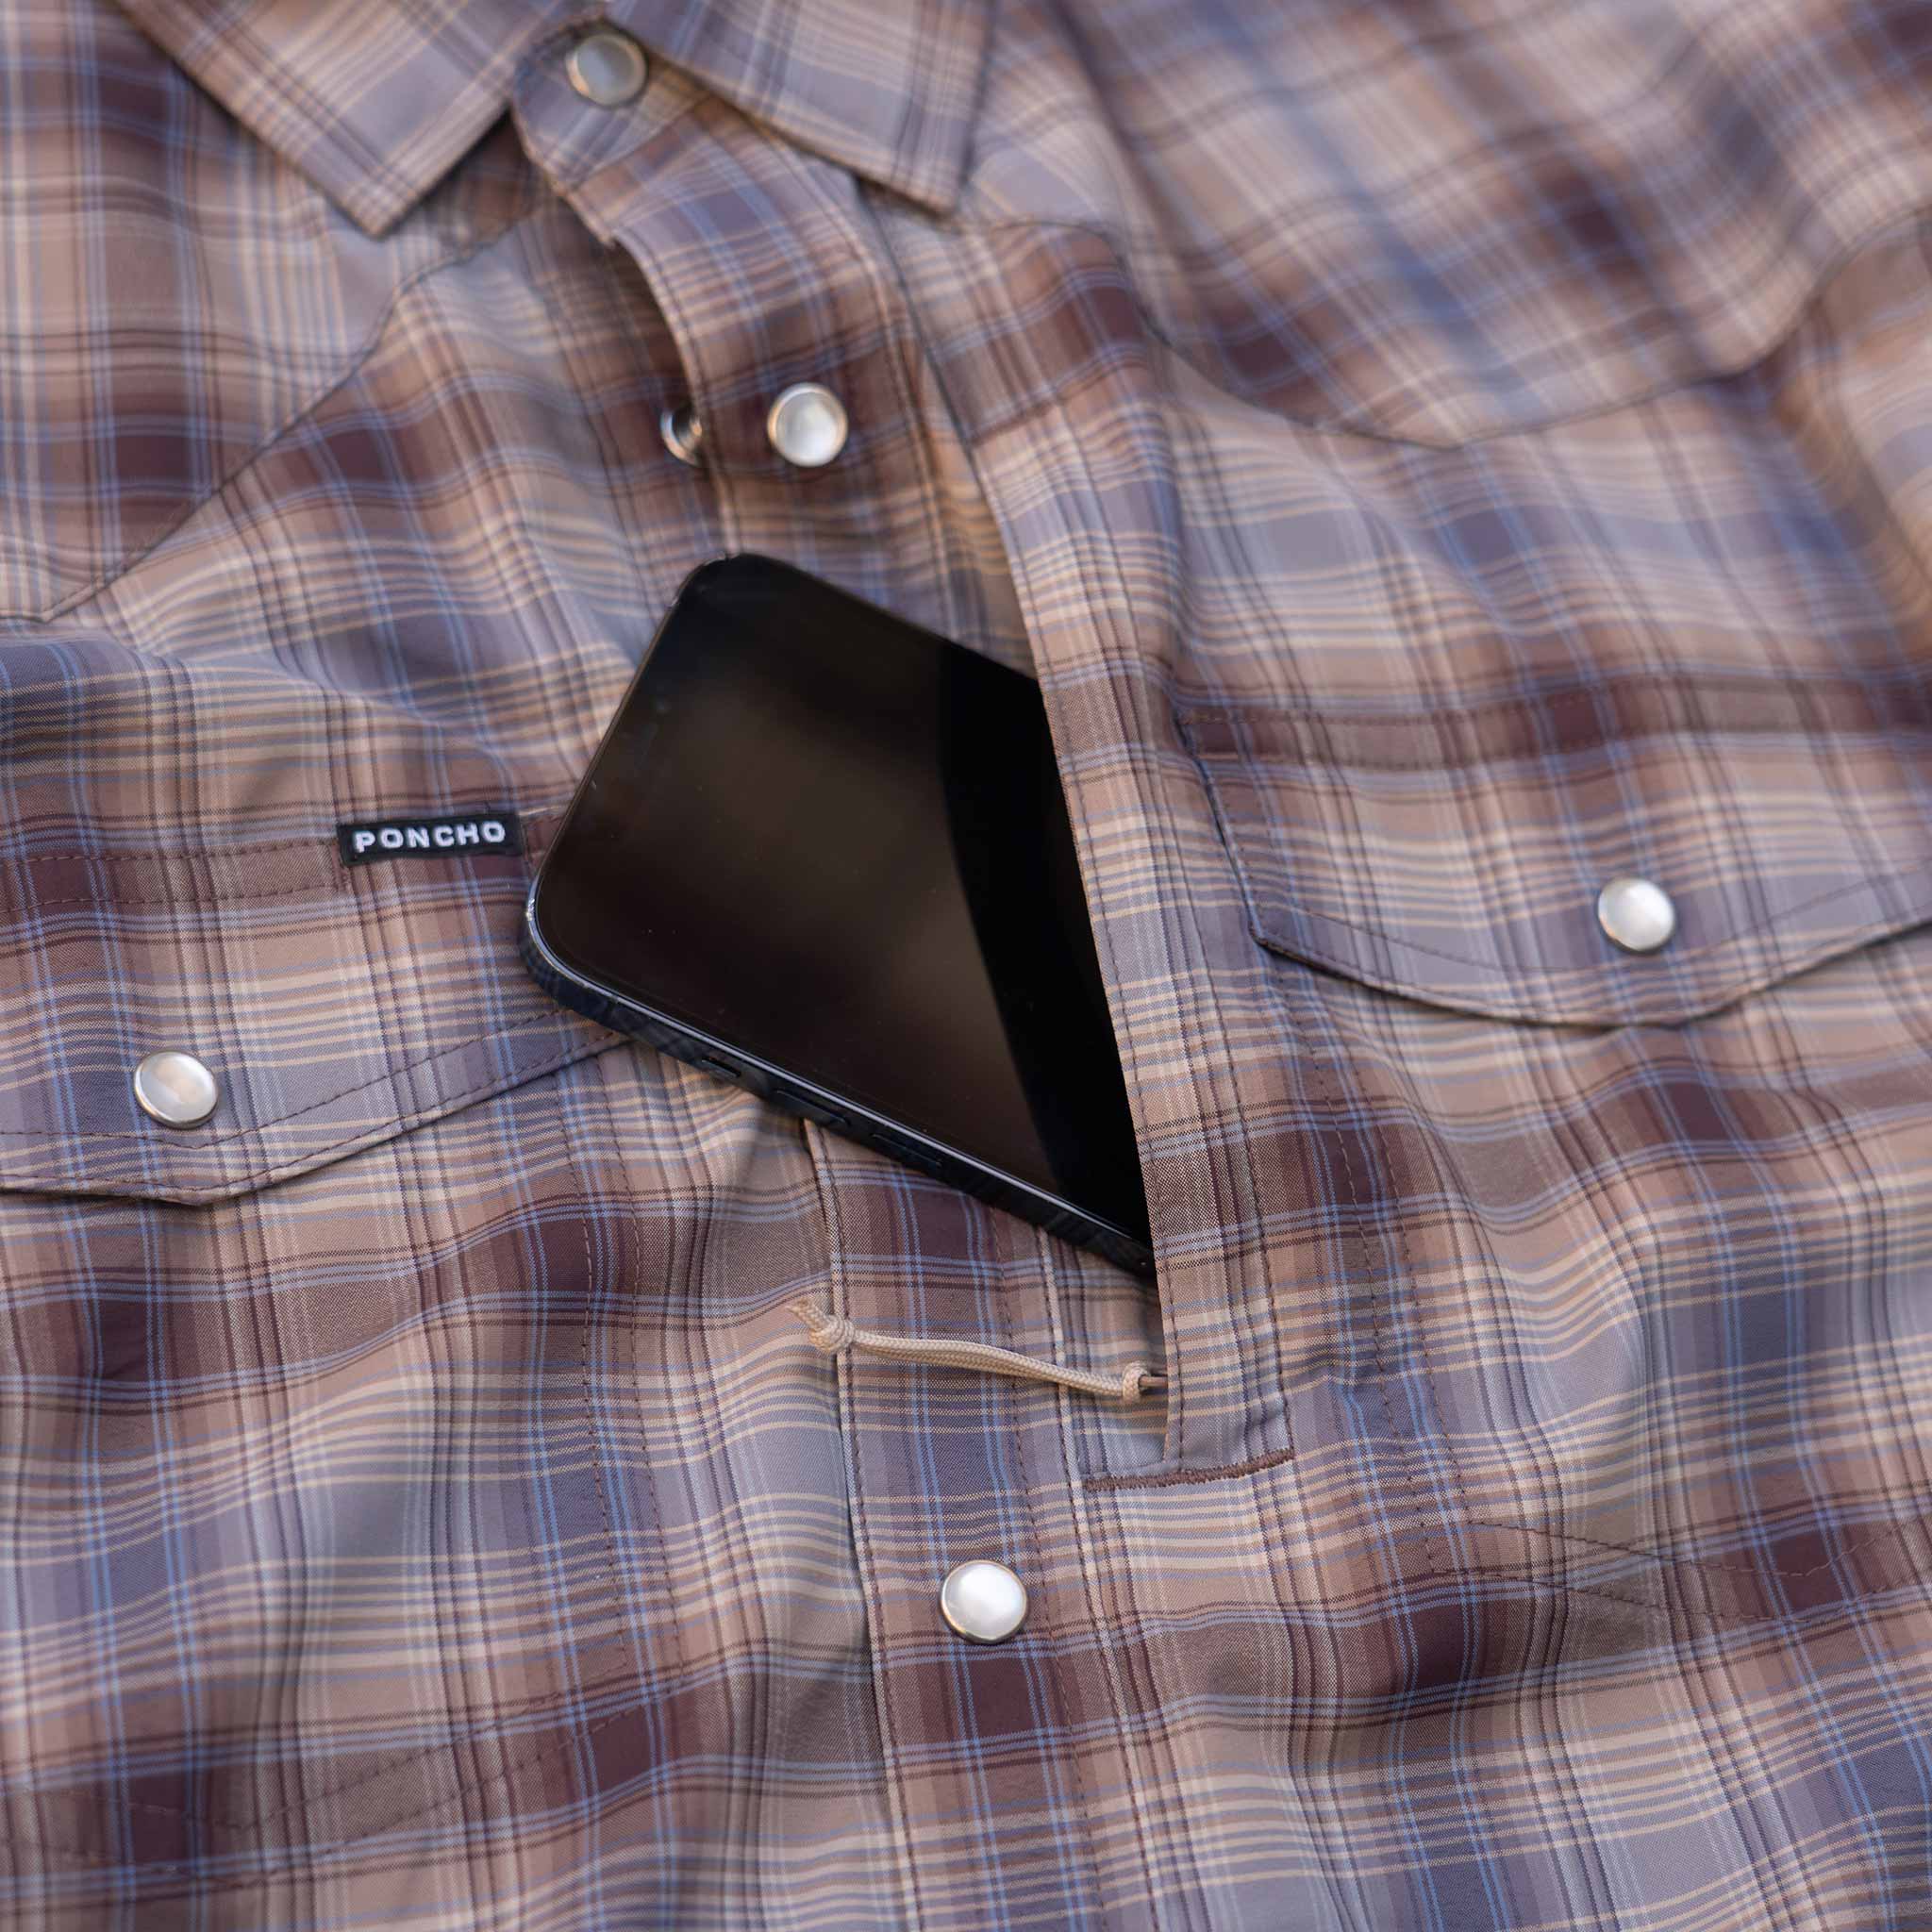 closeup of phone is chest zip pocket on shirt